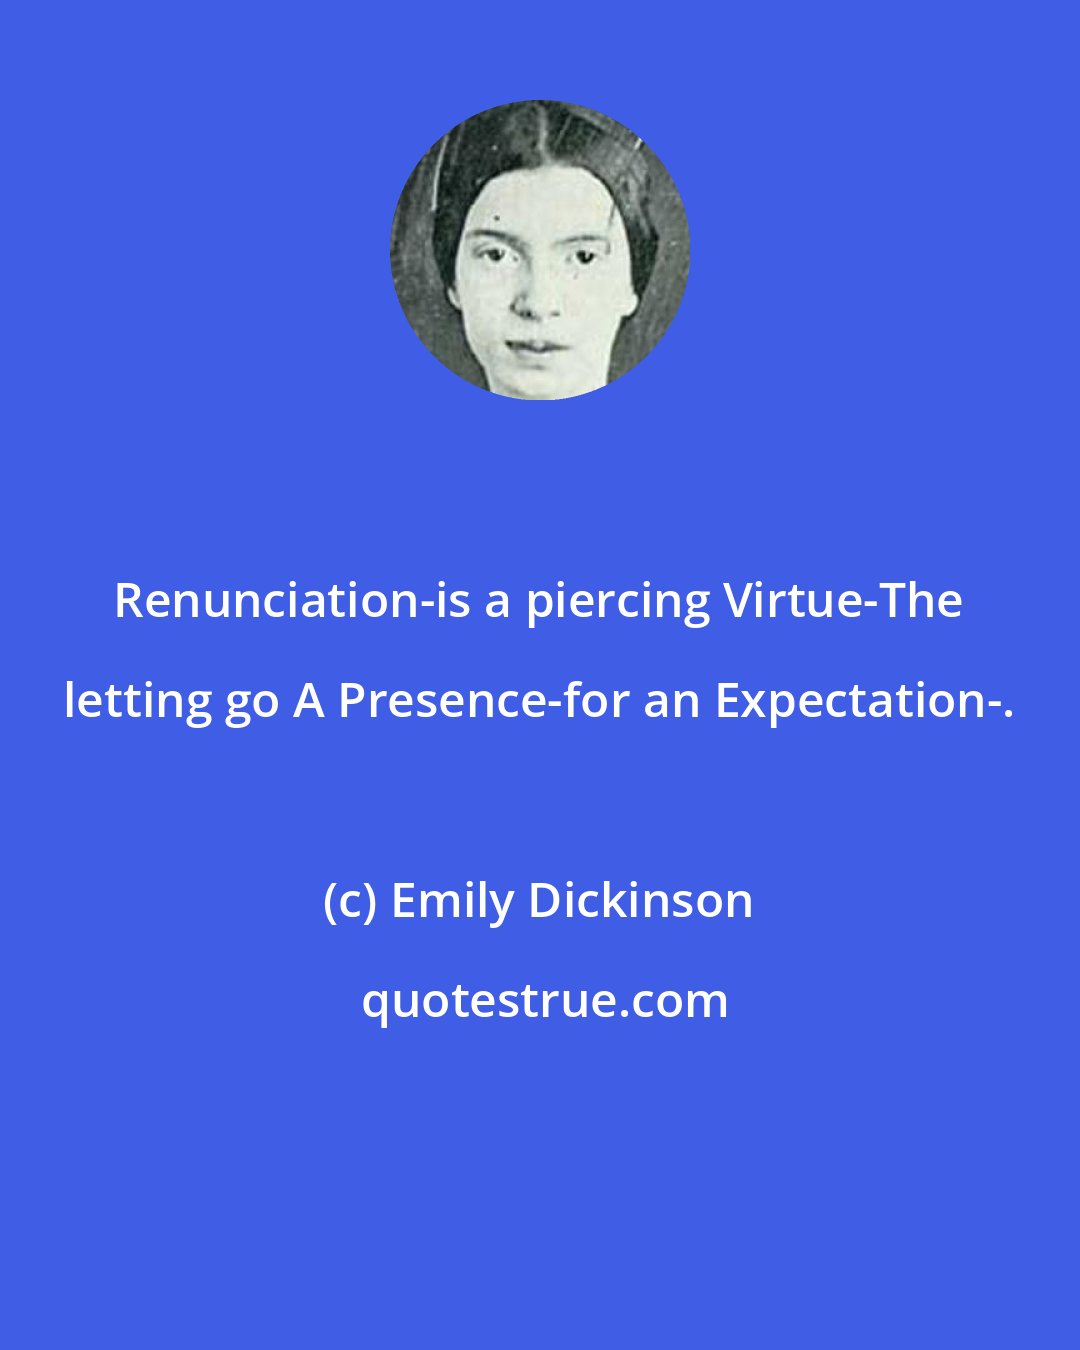 Emily Dickinson: Renunciation-is a piercing Virtue-The letting go A Presence-for an Expectation-.